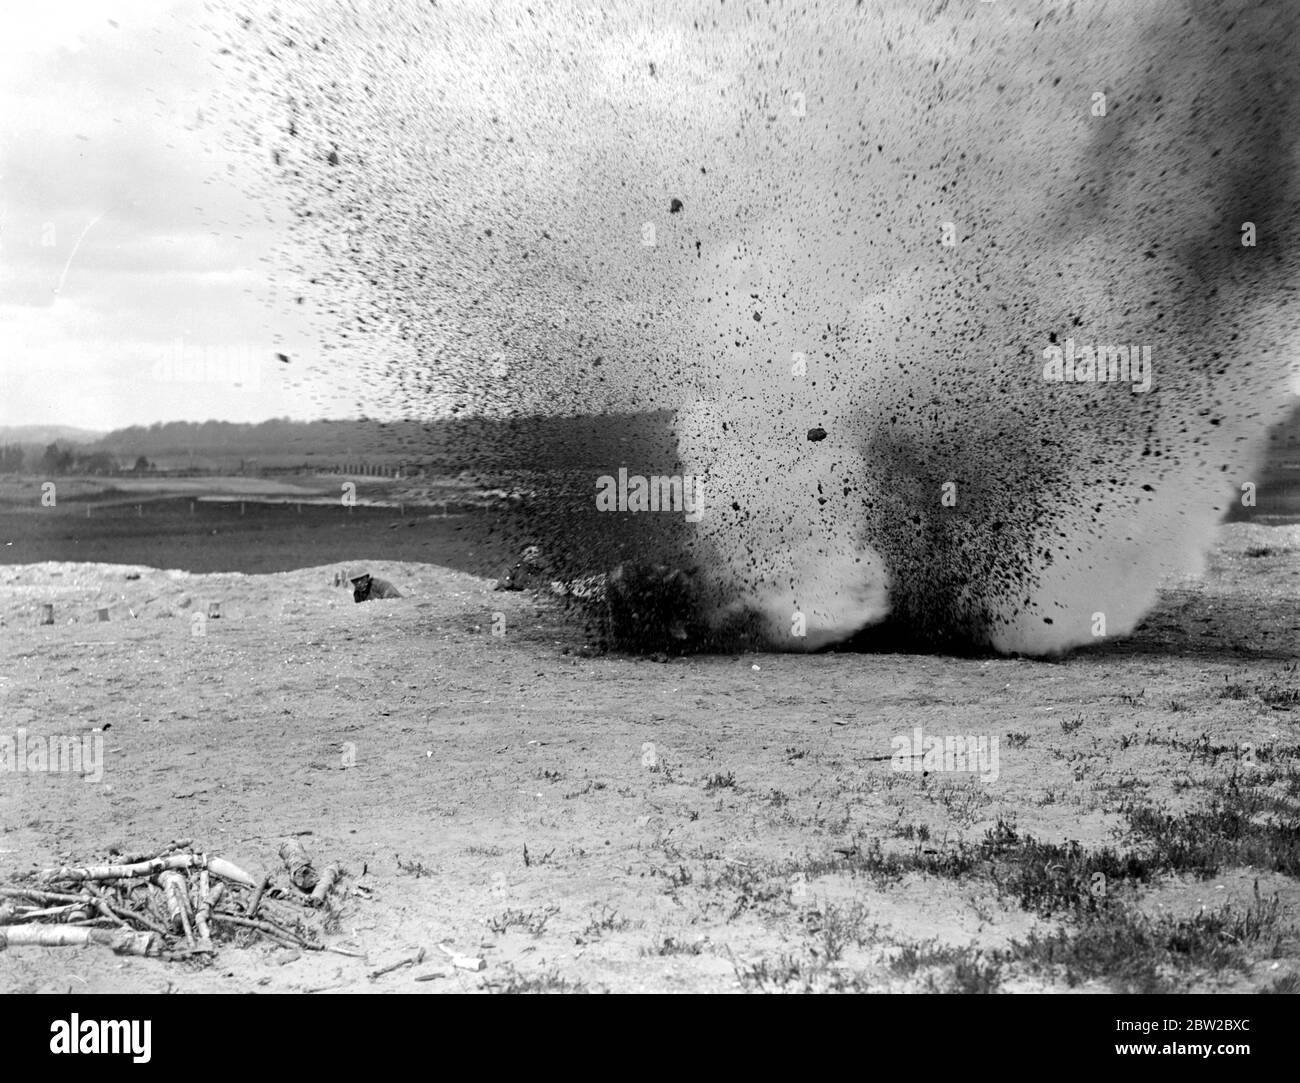 Training dogs at the War Dog's Training School at Lyndhurst. Dog jumps past explosion 26 April 1919 Stock Photo